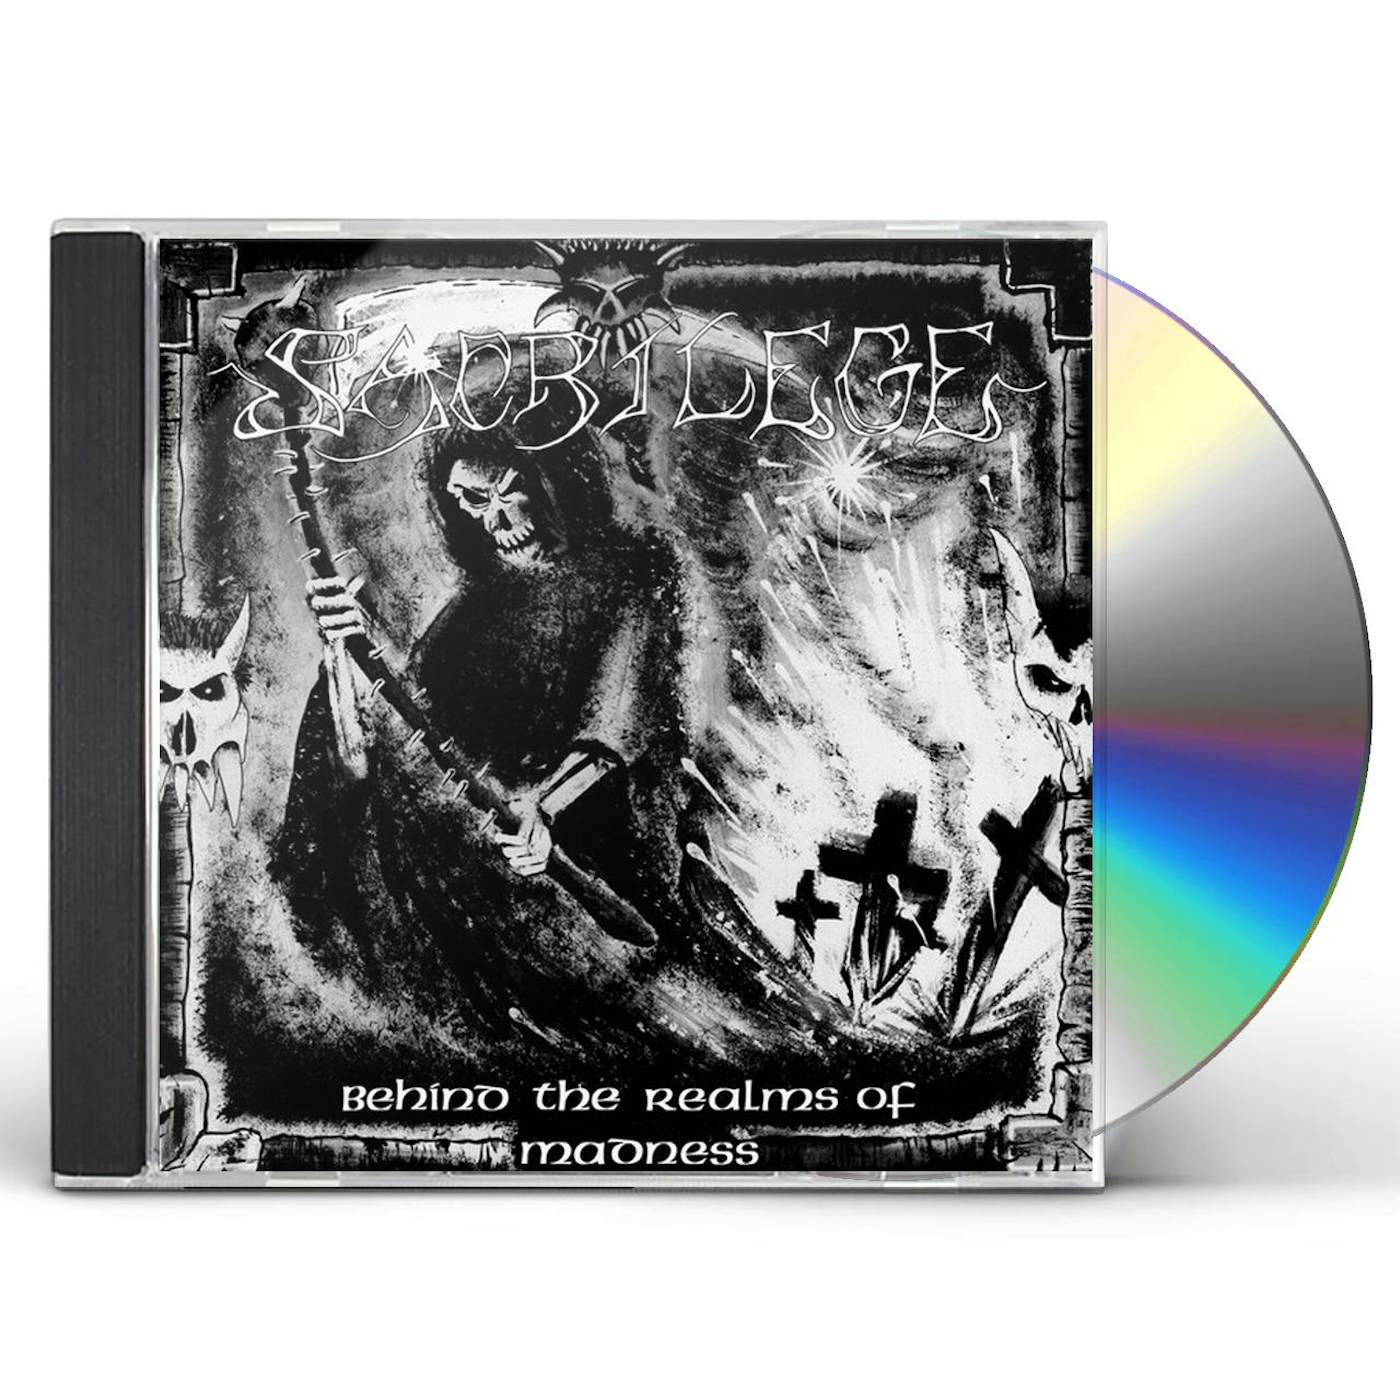 Sacrilege 117424 BEHIND THE REALMS OF MADNESS CD